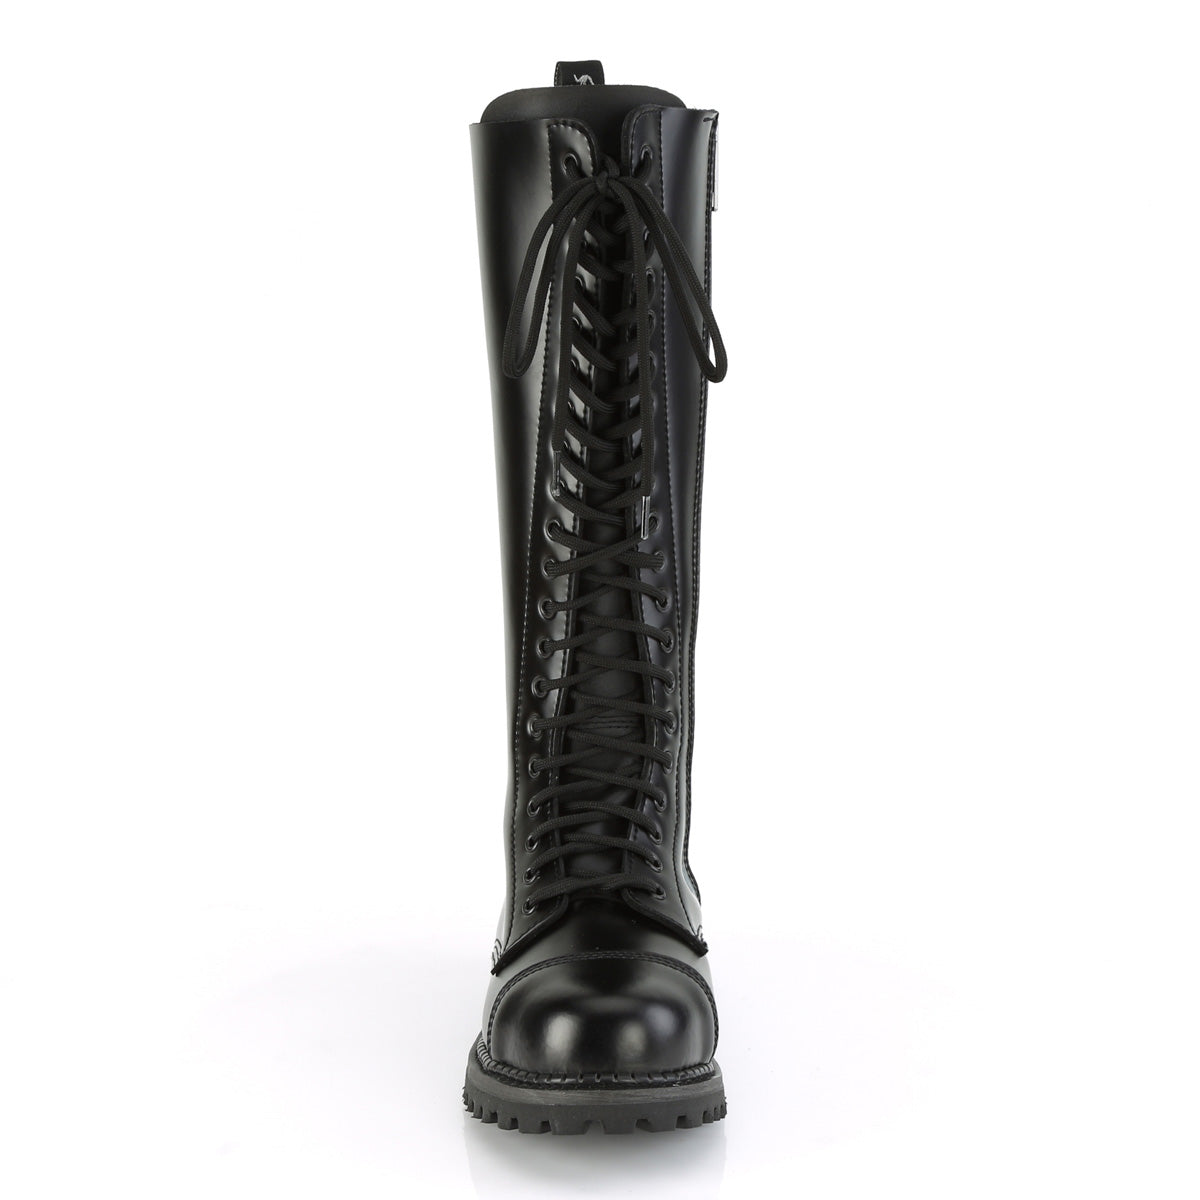 Riot Knee High Leather Boots (Unisex)